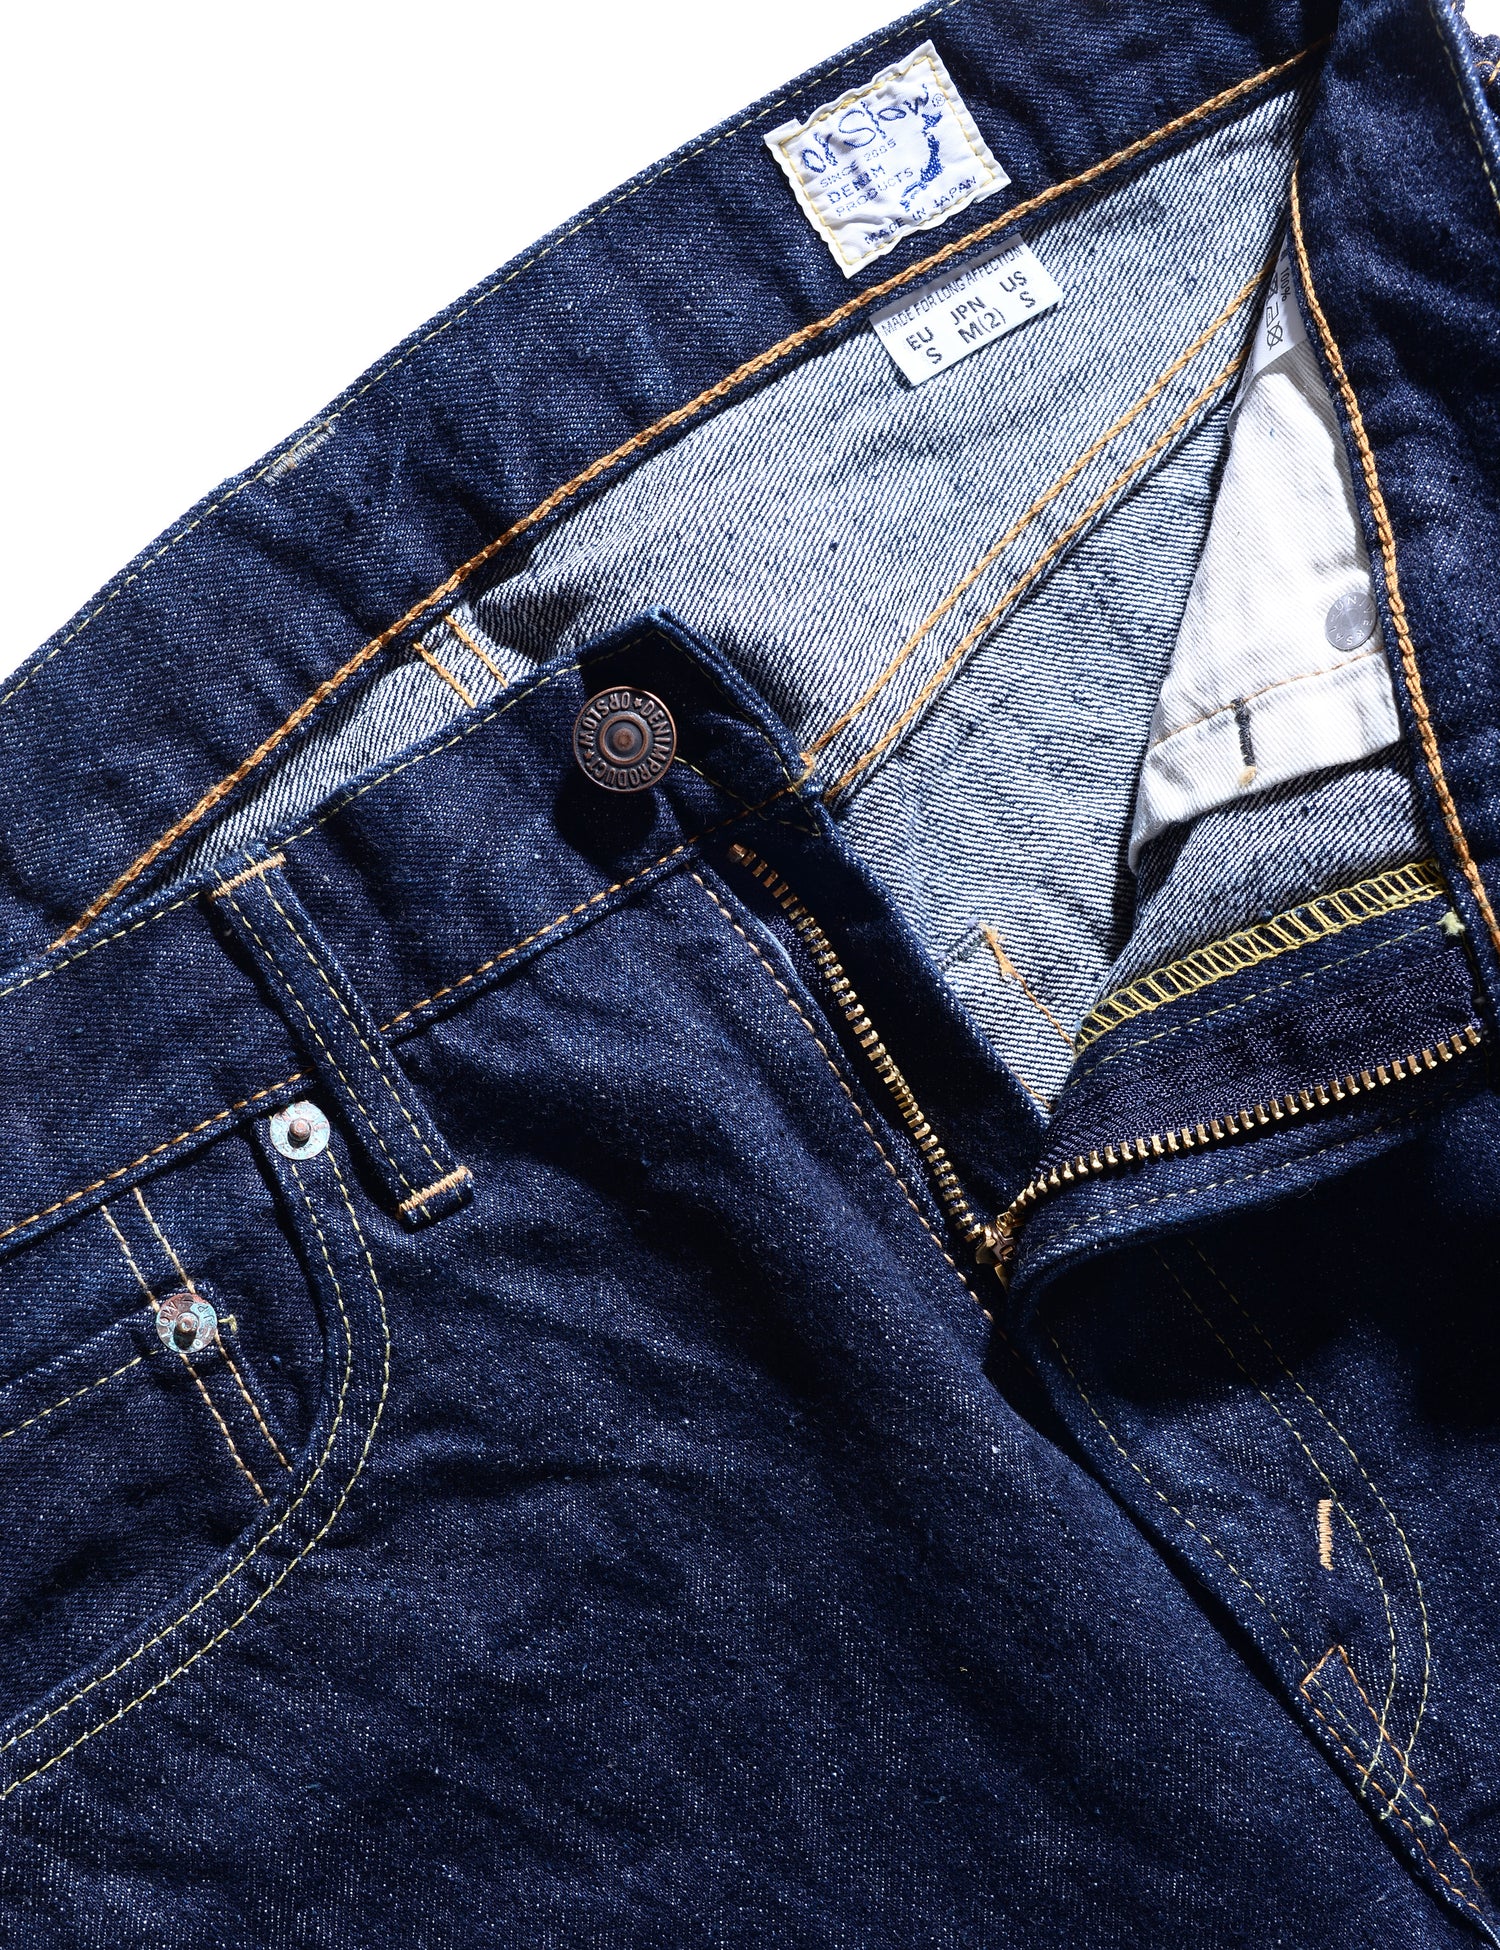 Unzipped detail shot showing zipper, button, pocket, and labeling of 107 Slim Fit Selvedge Denim Jeans - One Wash